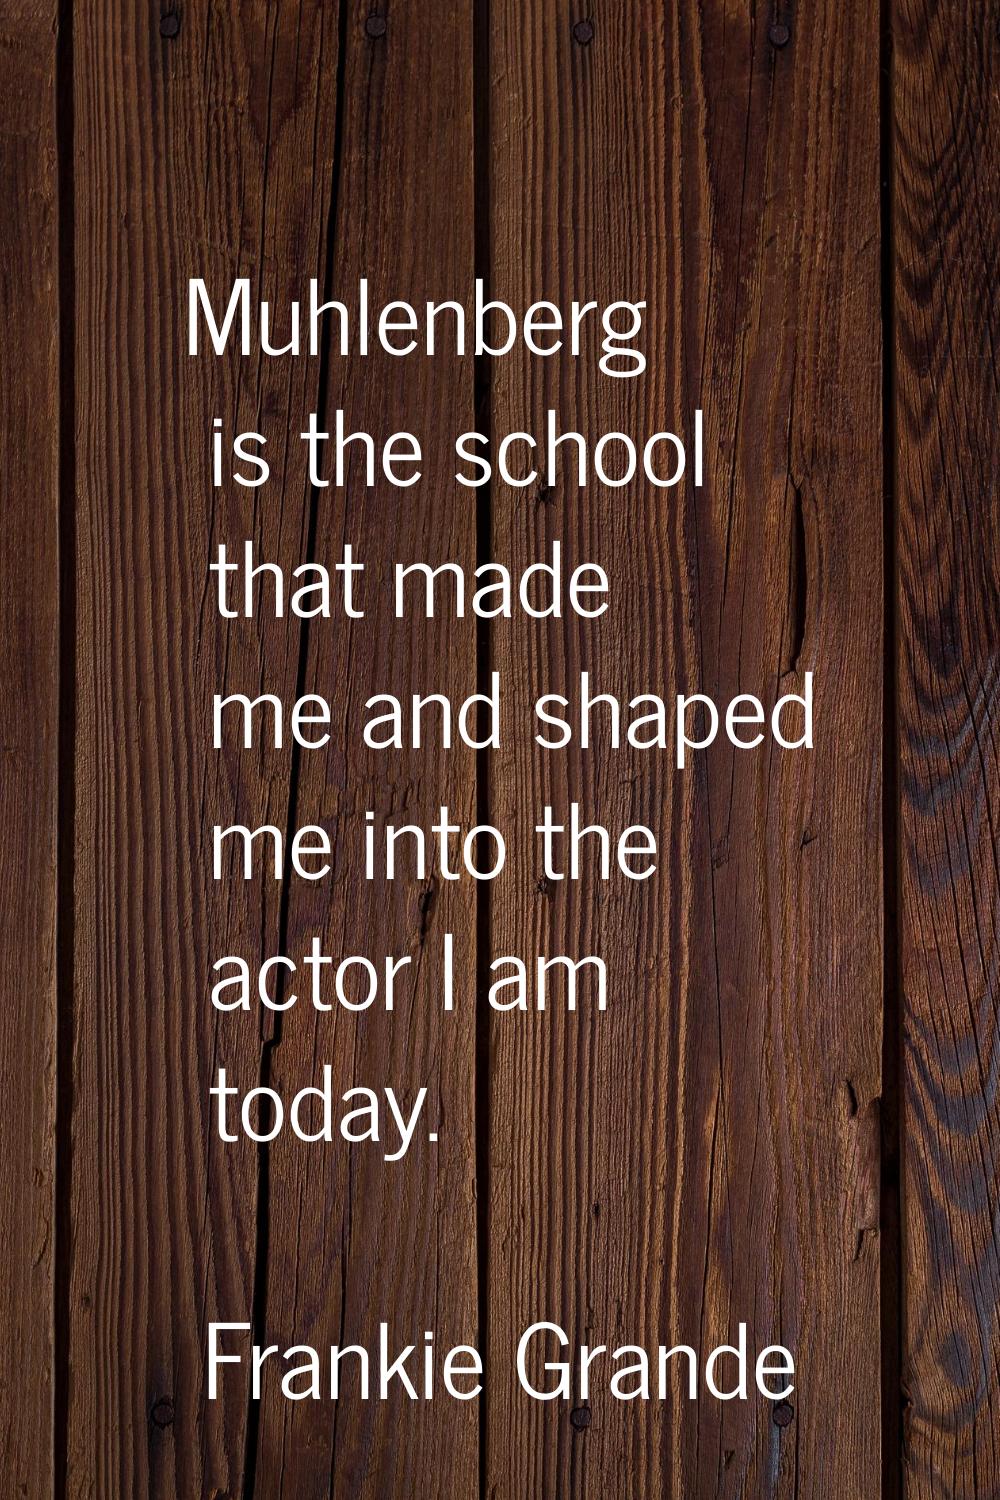 Muhlenberg is the school that made me and shaped me into the actor I am today.